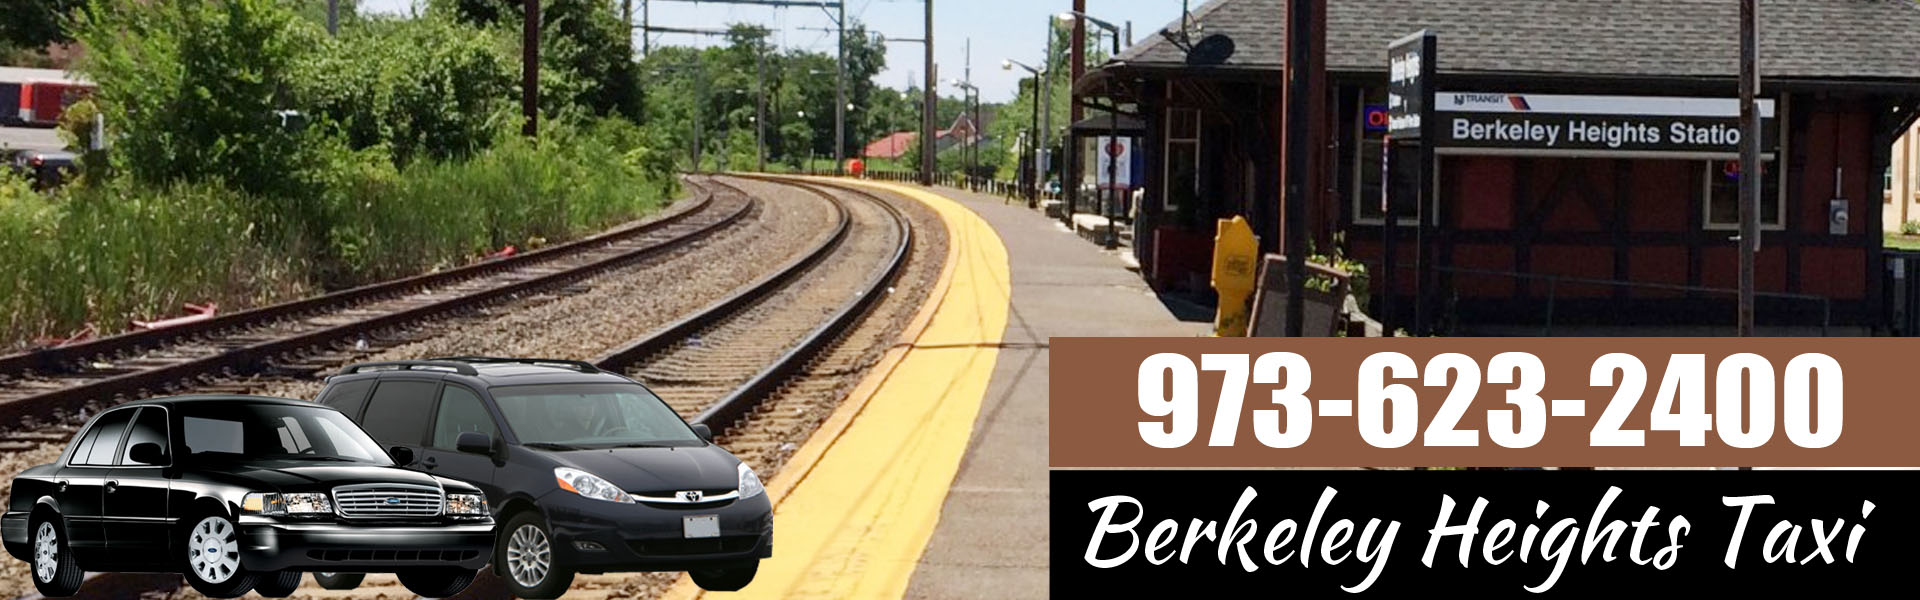 Berkeley Heights to Newark Airport Taxi Service